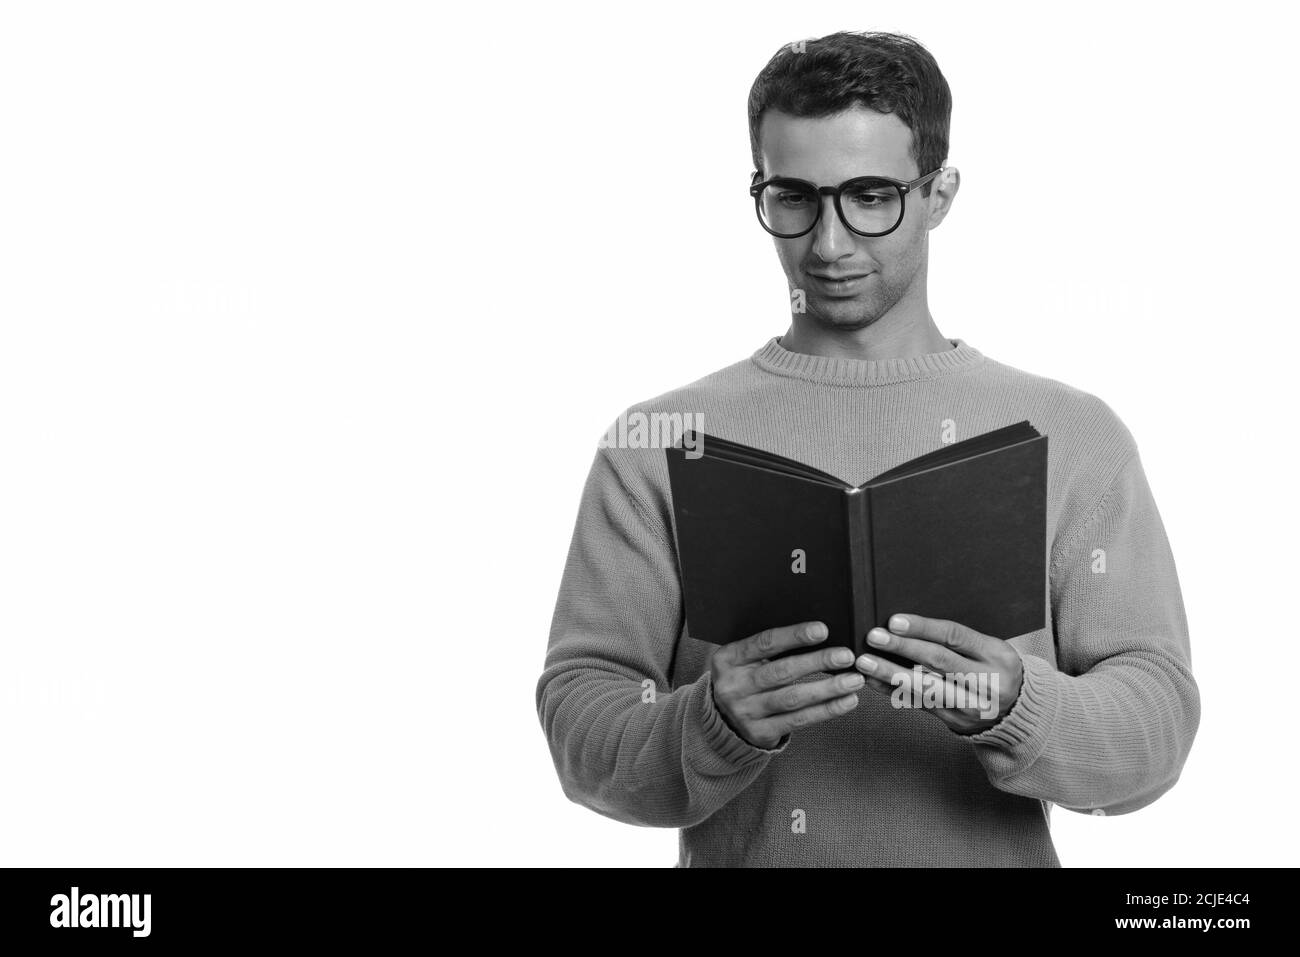 Young happy Iranian man smiling and reading book Stock Photo